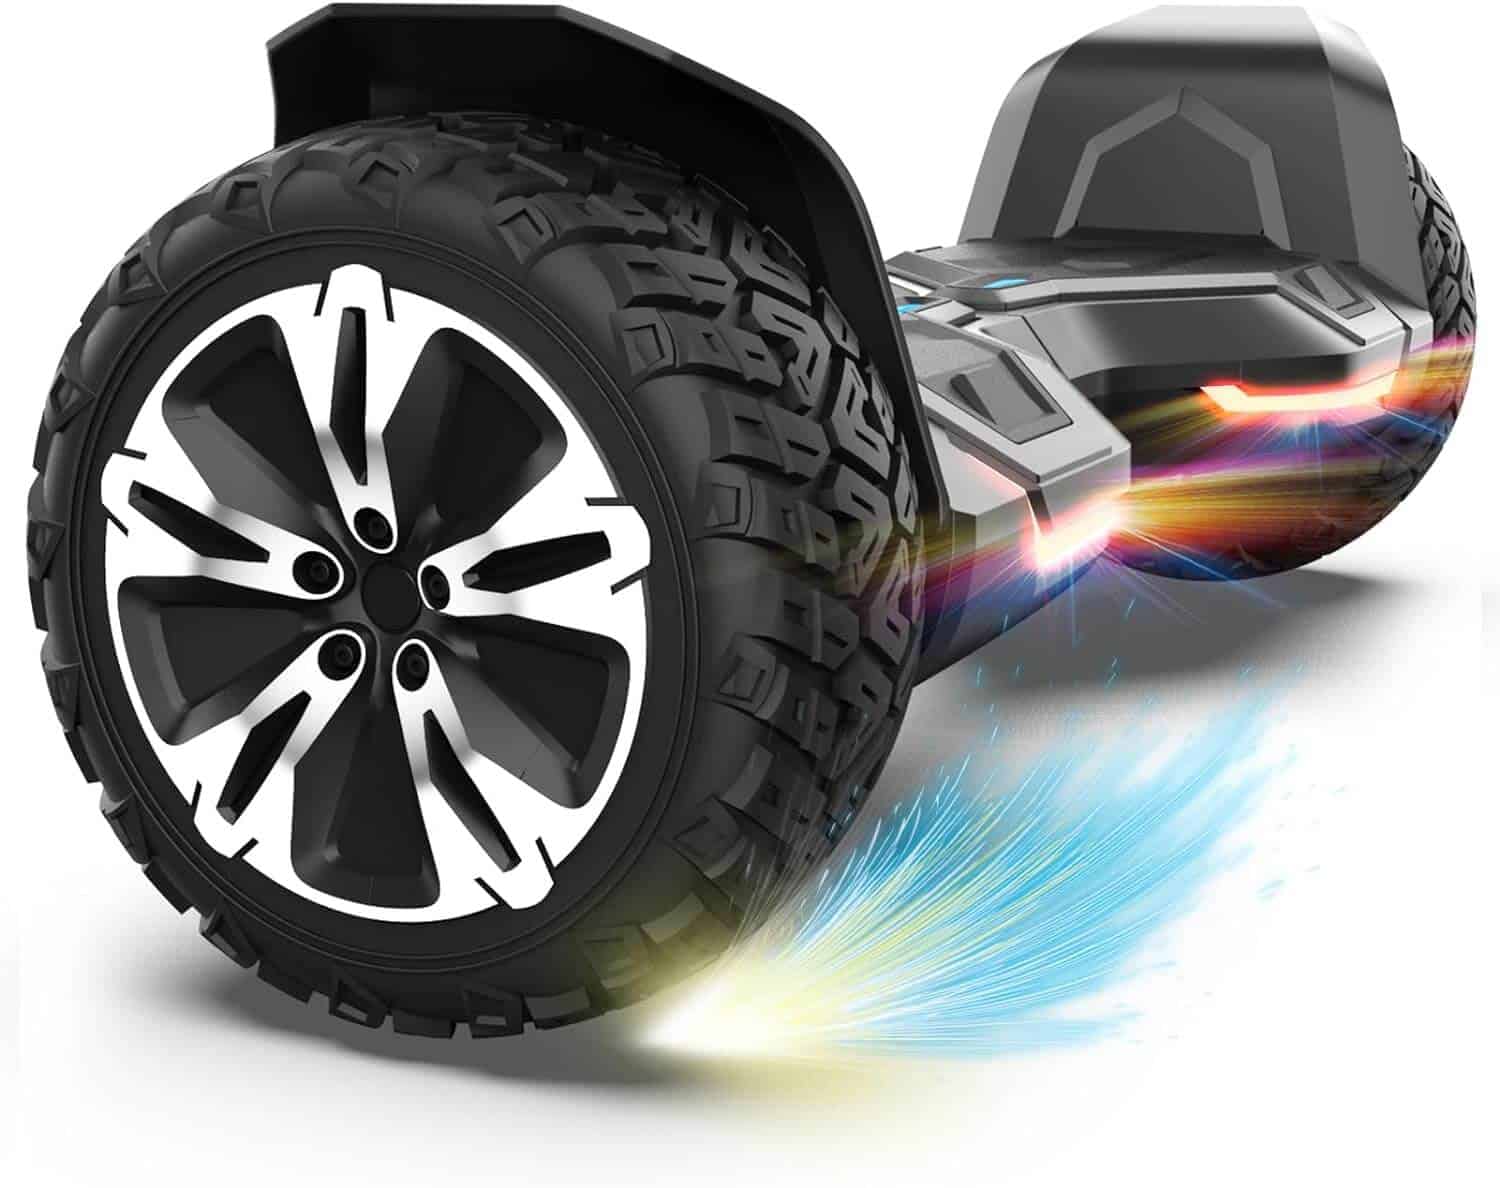 Best all terrain hoverboard that's secure and can handle unpaved roadways